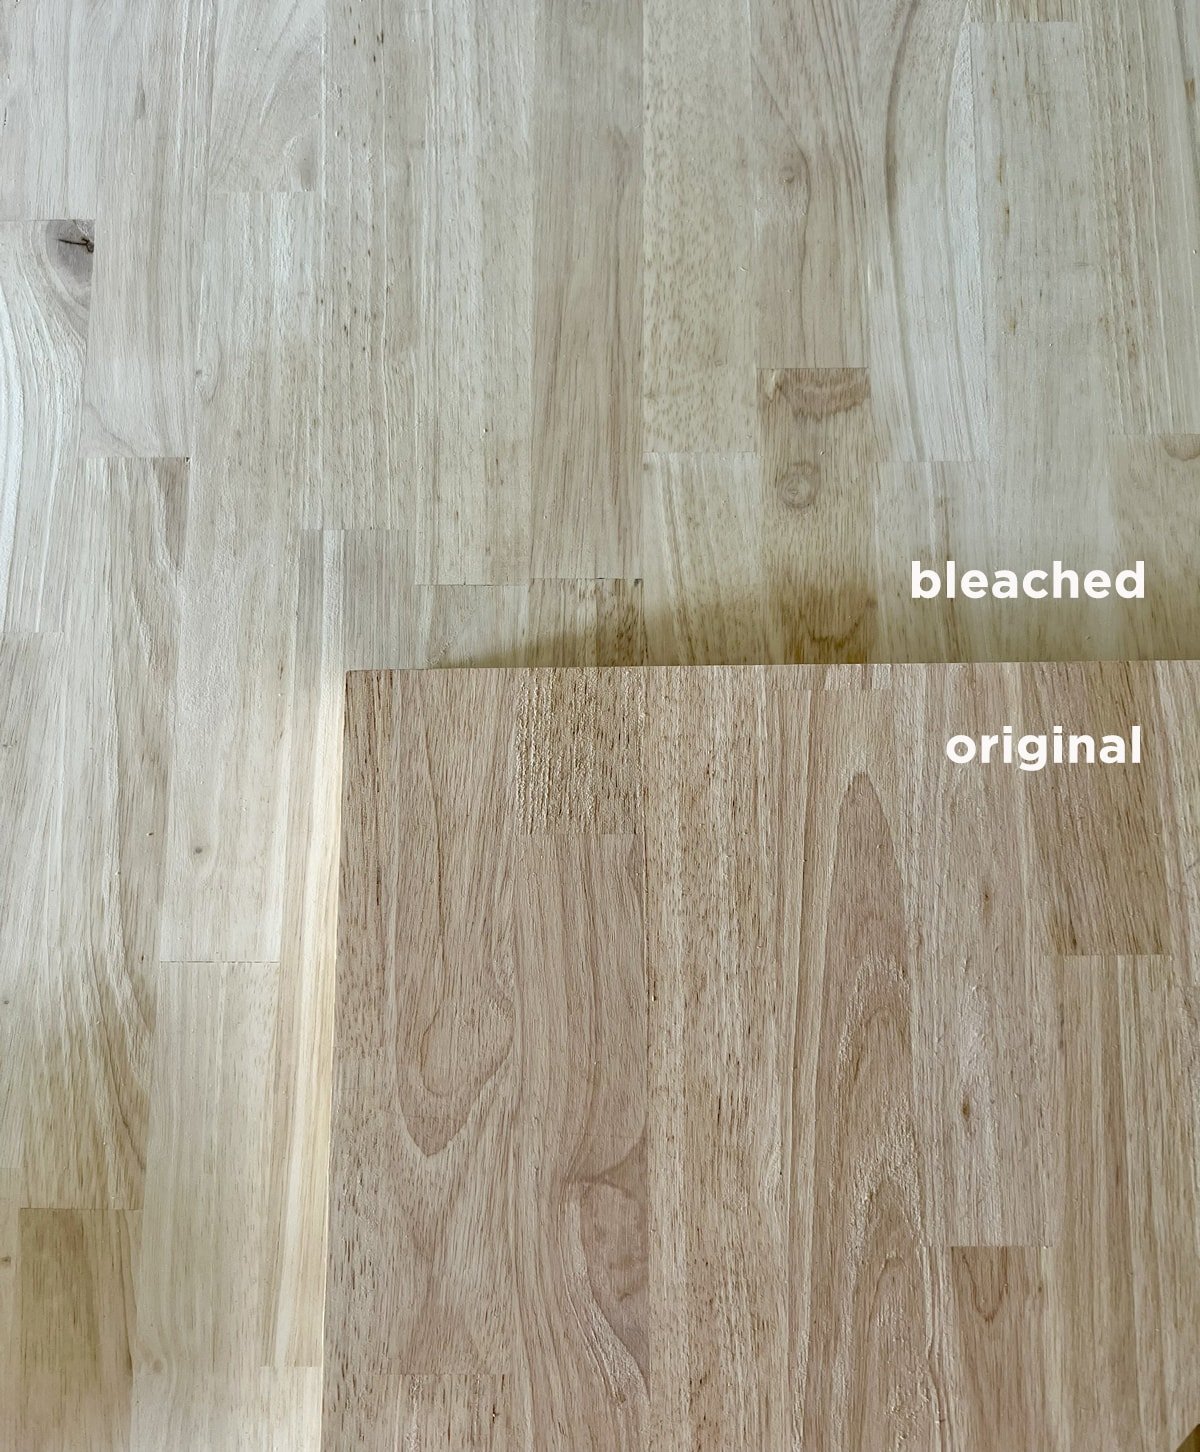 bleached butcher block counters side by side